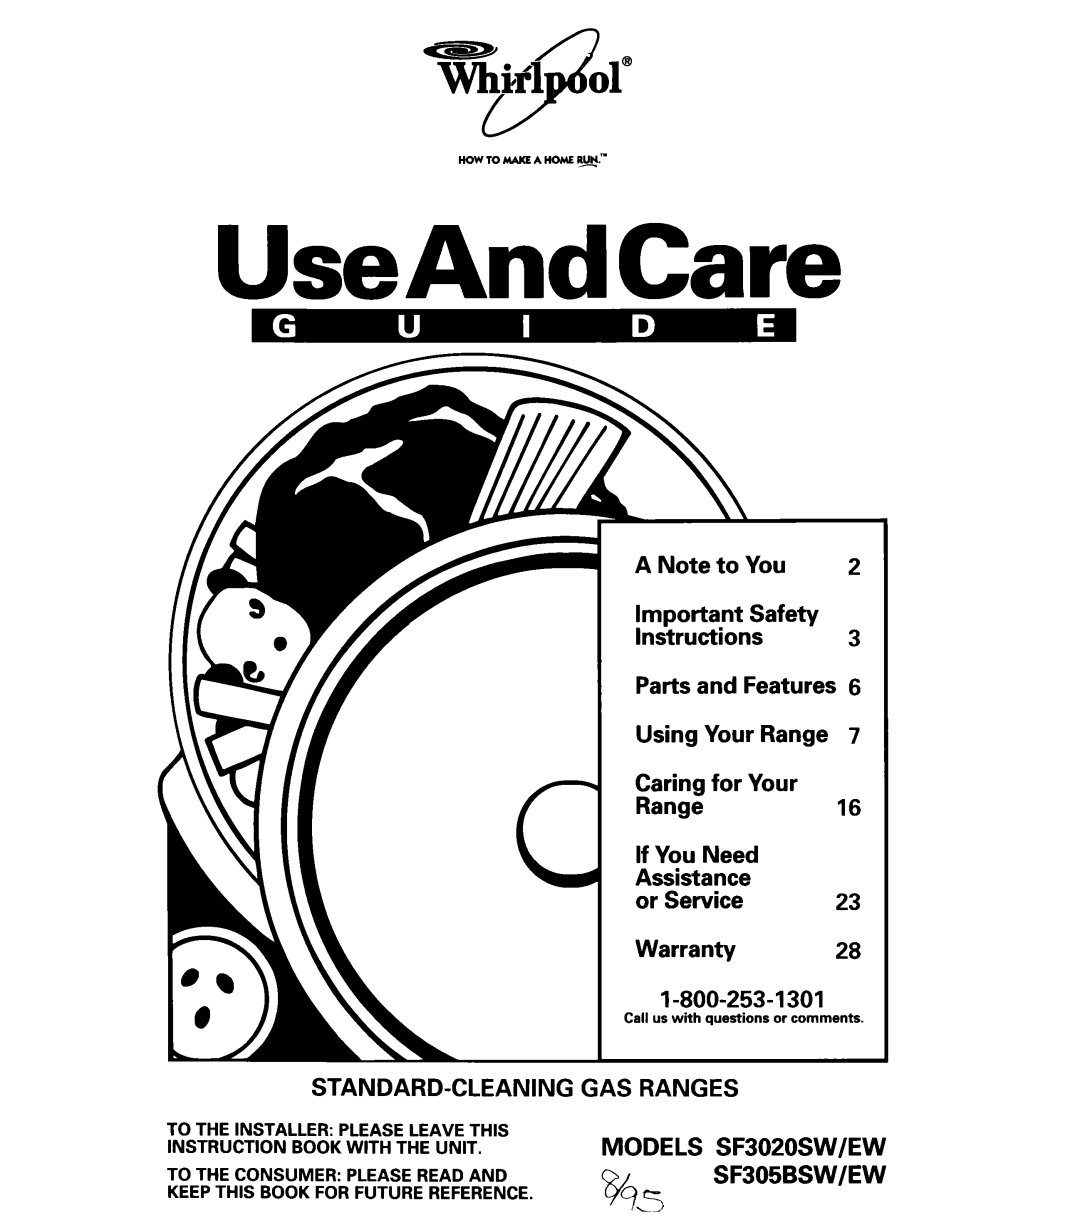 Whirlpool SF305BSW/EW manual A Note to You, Important Safety Instructions3 Parts and Features, Standard-Cleaninggas Ranges 